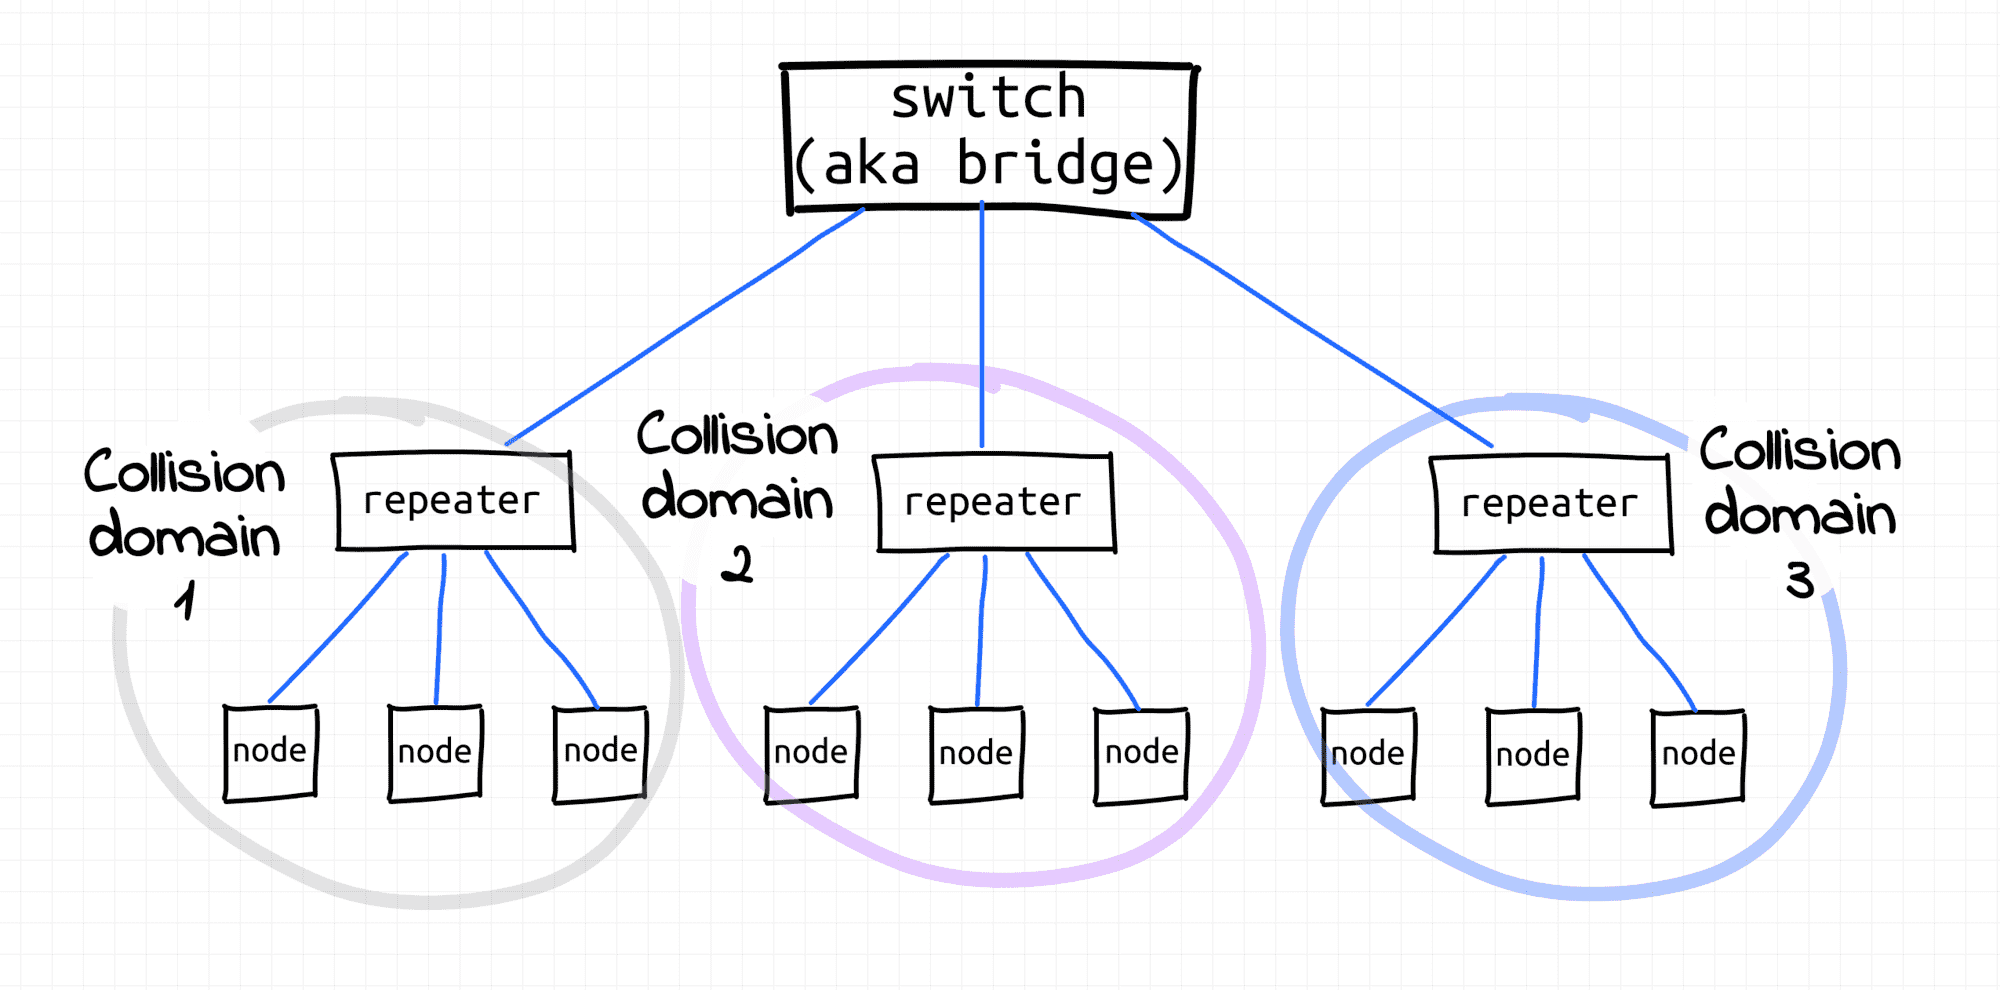 Three collision domains separated by a bridge (rather dated setup).